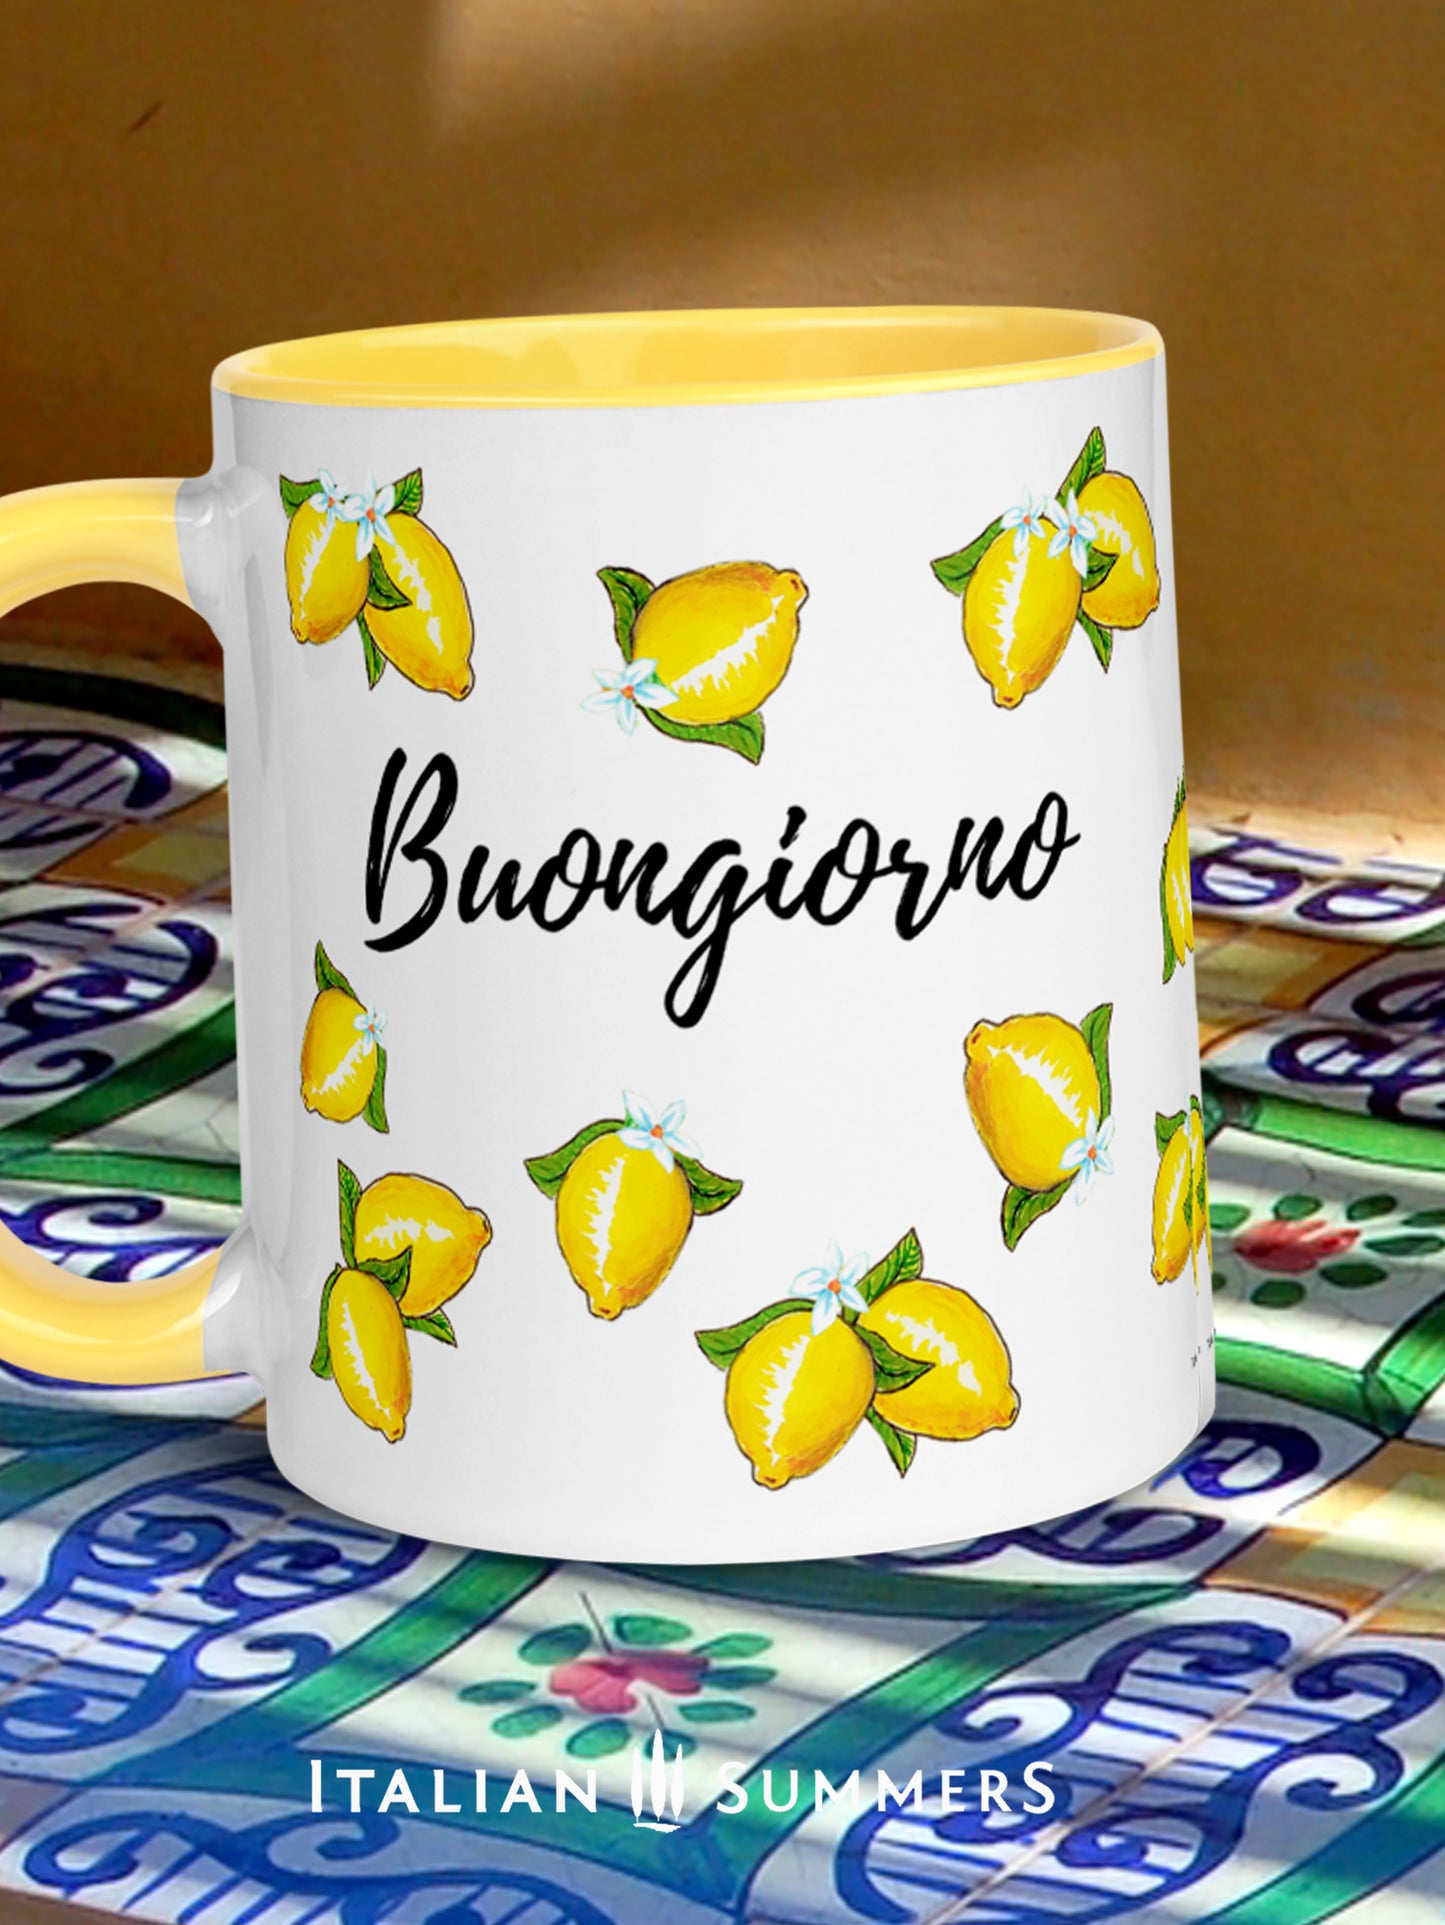 Italy inspired coffee mug with happy sketched lemons  over the whole mug on all sidesand a playful Buongiorno writing beteen the lemons. The inside and handle of the mug are yellow. On the lemons are little lemon flowers. Made by Italian Summers